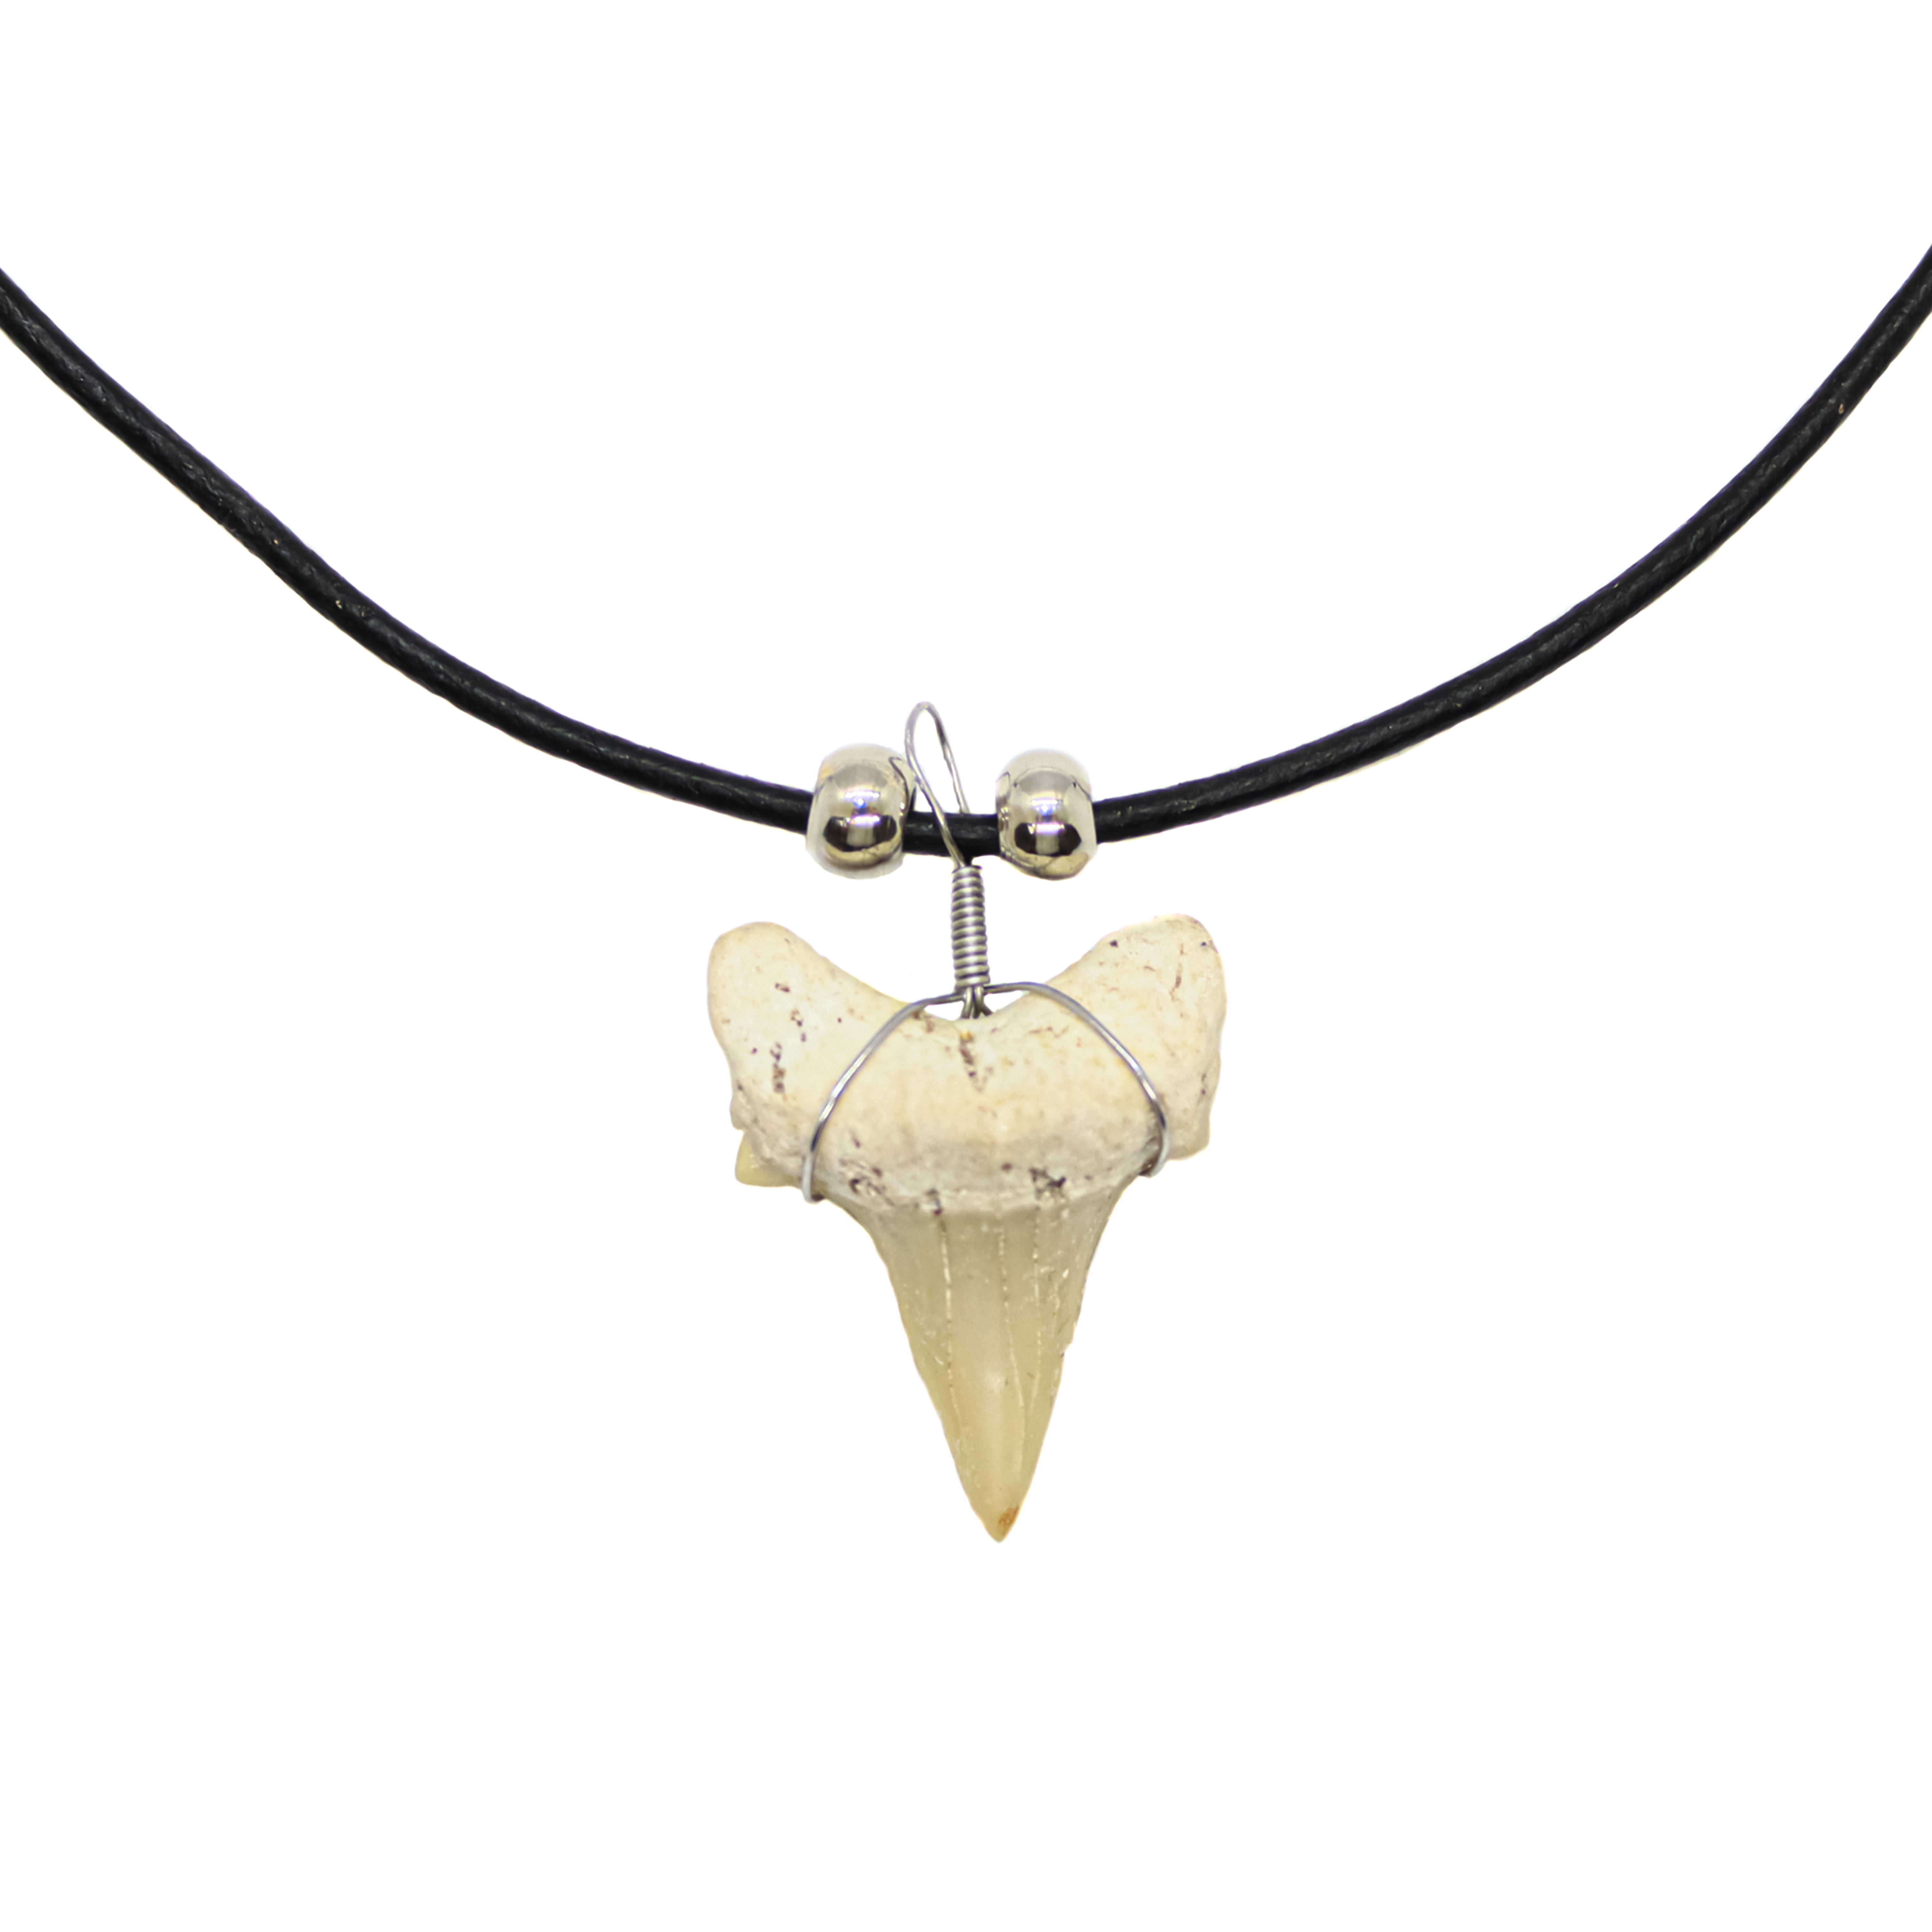 NEW REAL NATURAL SHARK TOOTH NECKLACE UNDER TEETH Y SHAPE SURFER MEN 